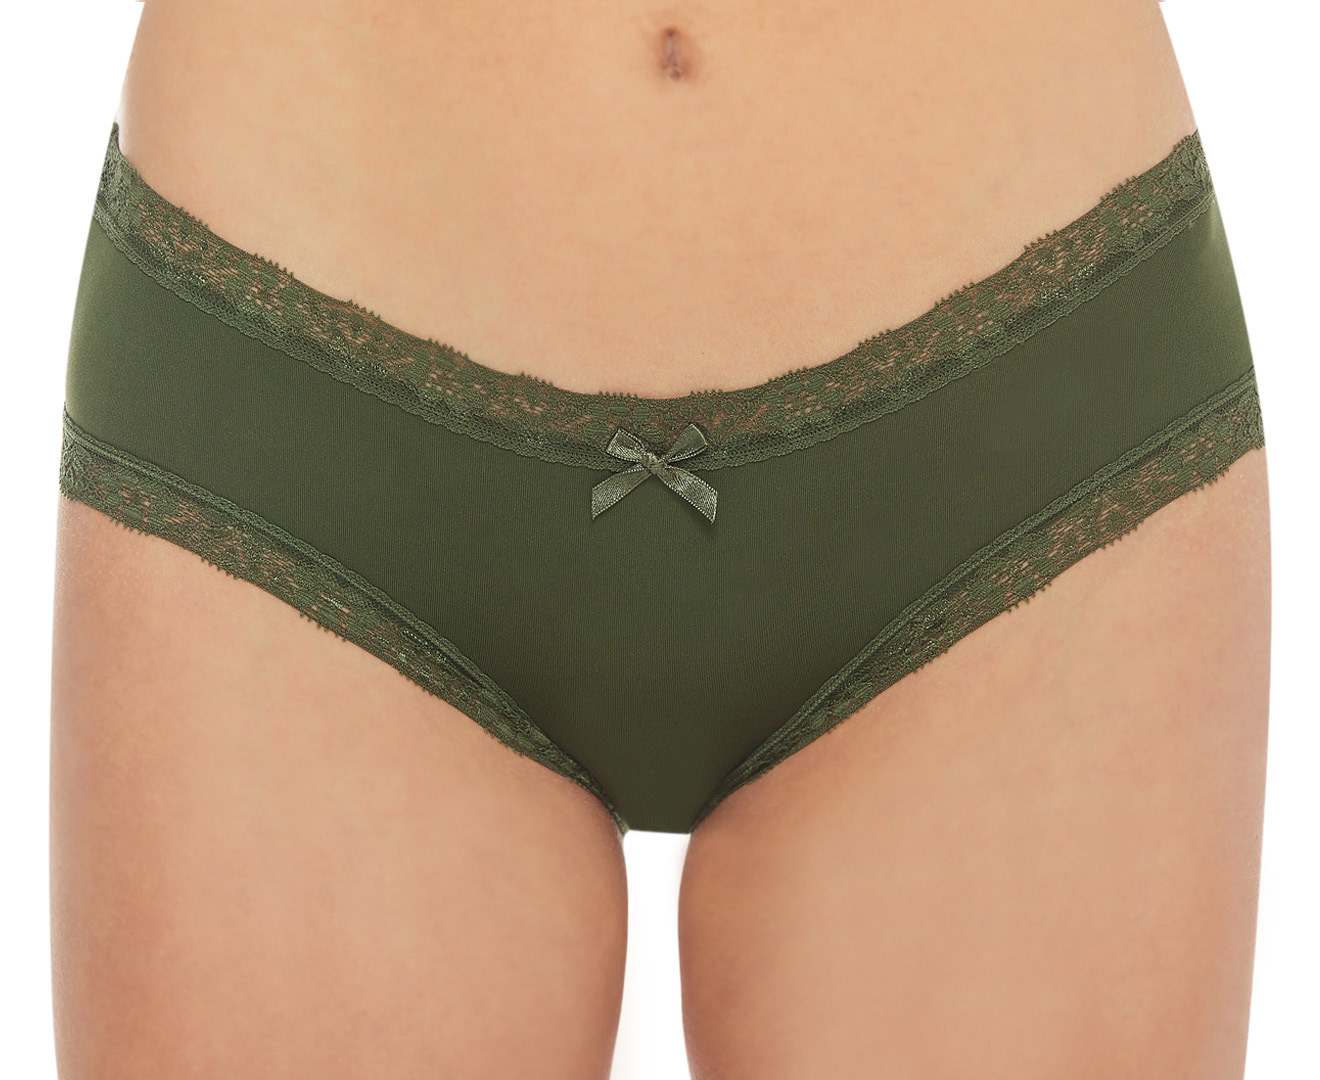 French Affair Women's Lace Cheeky Underwear 3-Pack - Pink Cosmos/Rifle  Green/Black